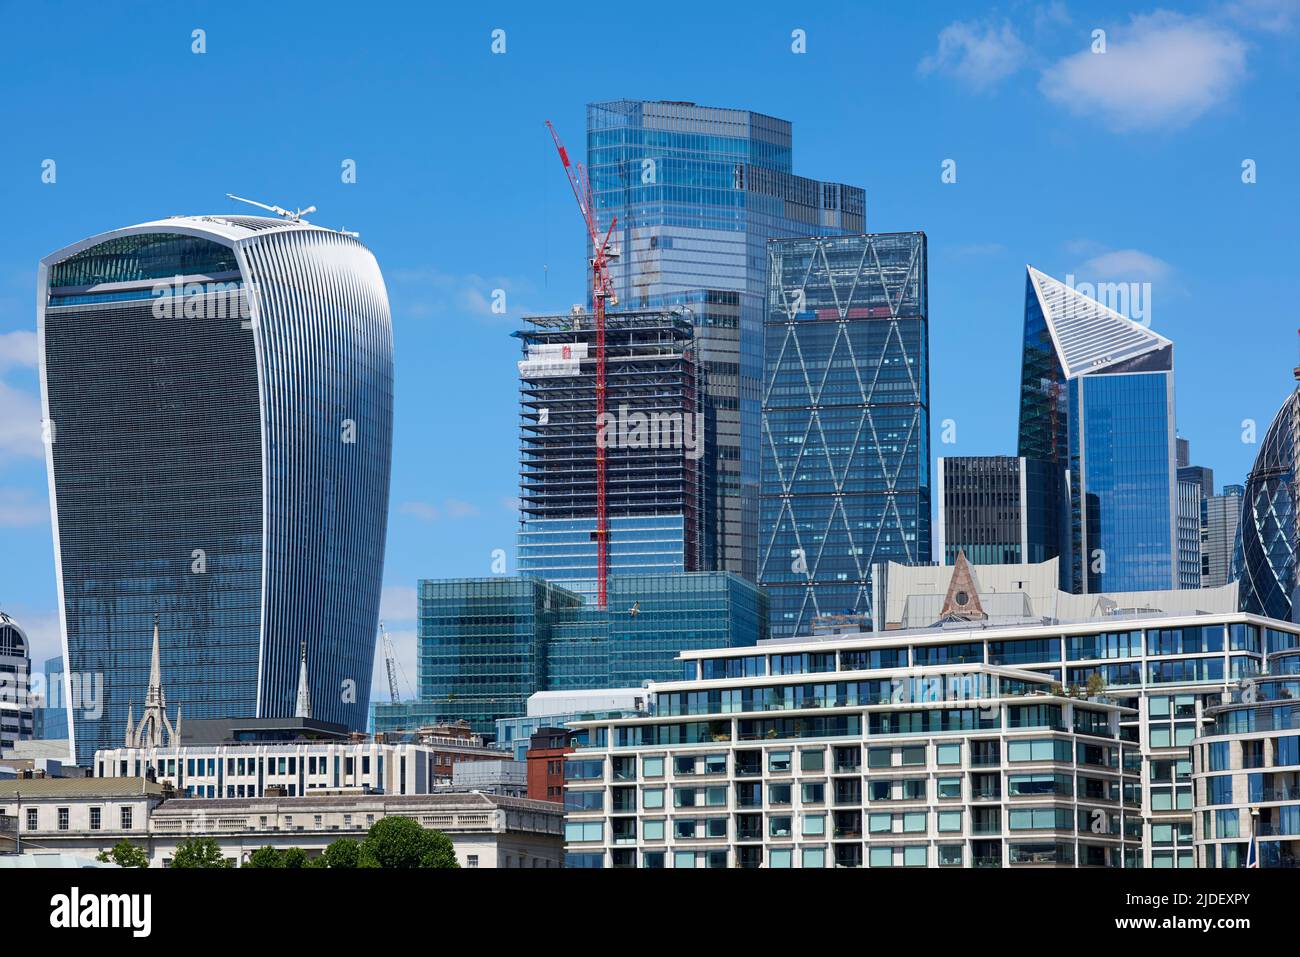 New skyscrapers in the City of London, UK, from the South Bank, including the Walkie Talkie Tower, the Leadenhall Building and 22 Bishopsgate Stock Photo